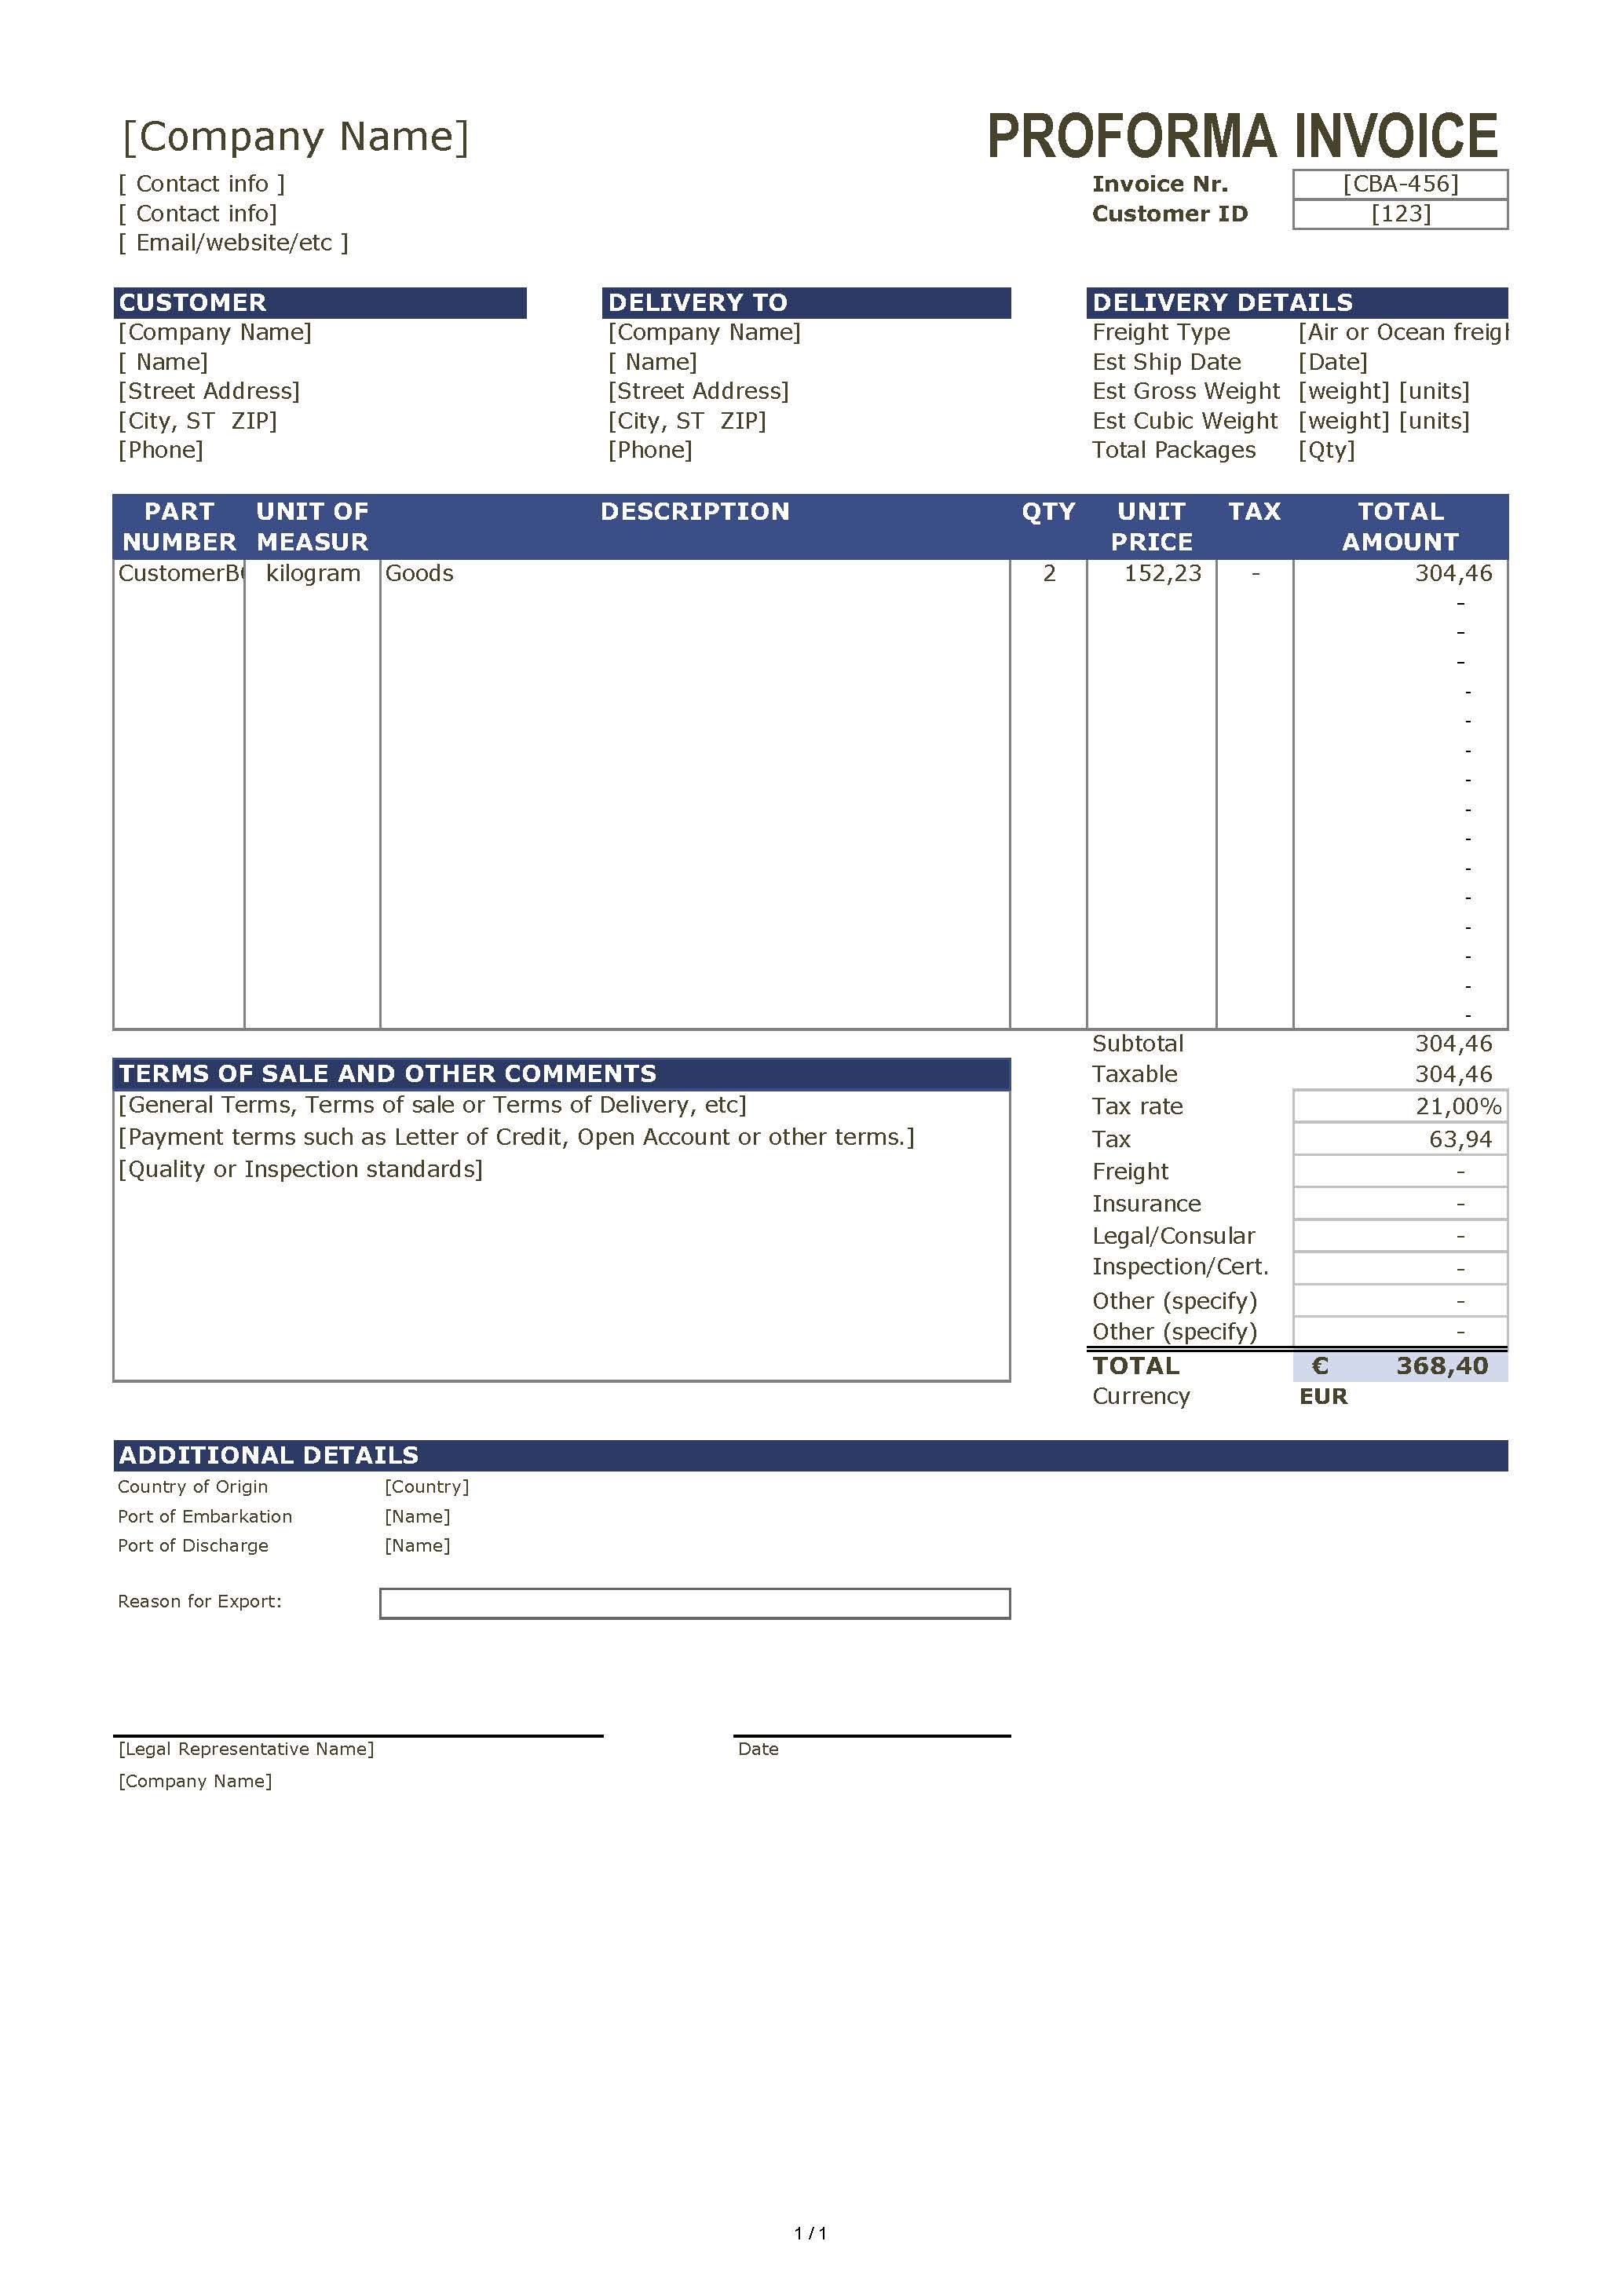 Detail Proforma Invoice Template Excel Nomer 18